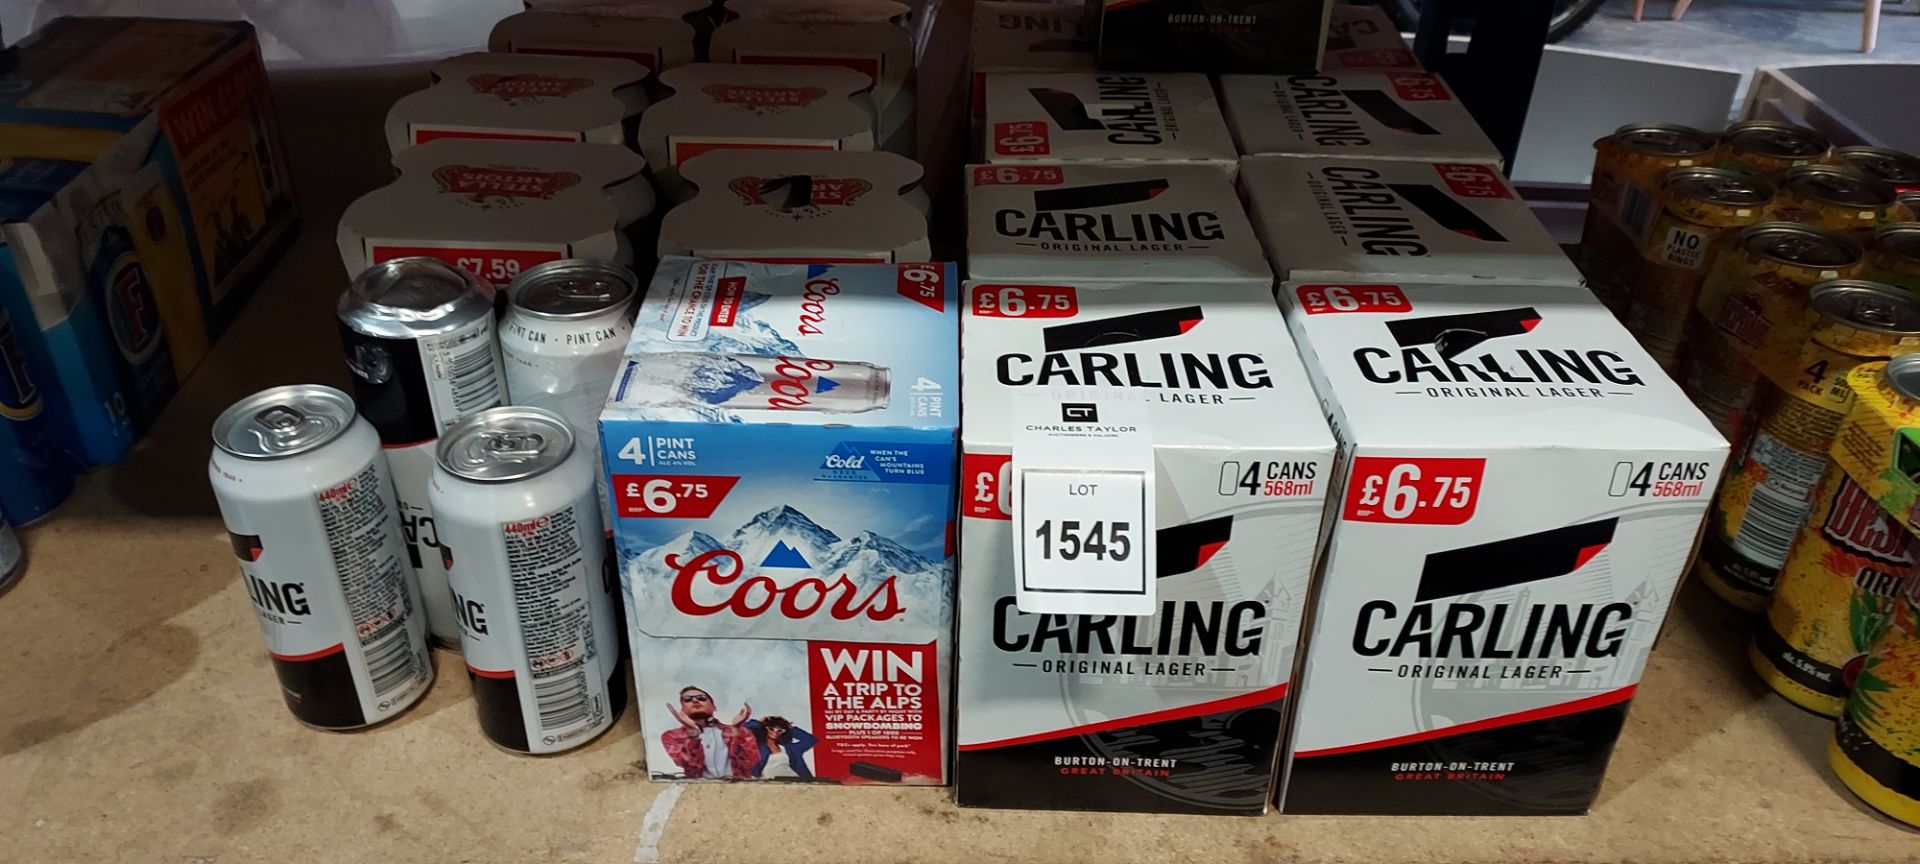 68 PIECE BRAND NEW MIXED BEER LOT CONTAINING CARLING - COOLS LIGHT - STELLA ARTOIS ALL 568ML - 2X